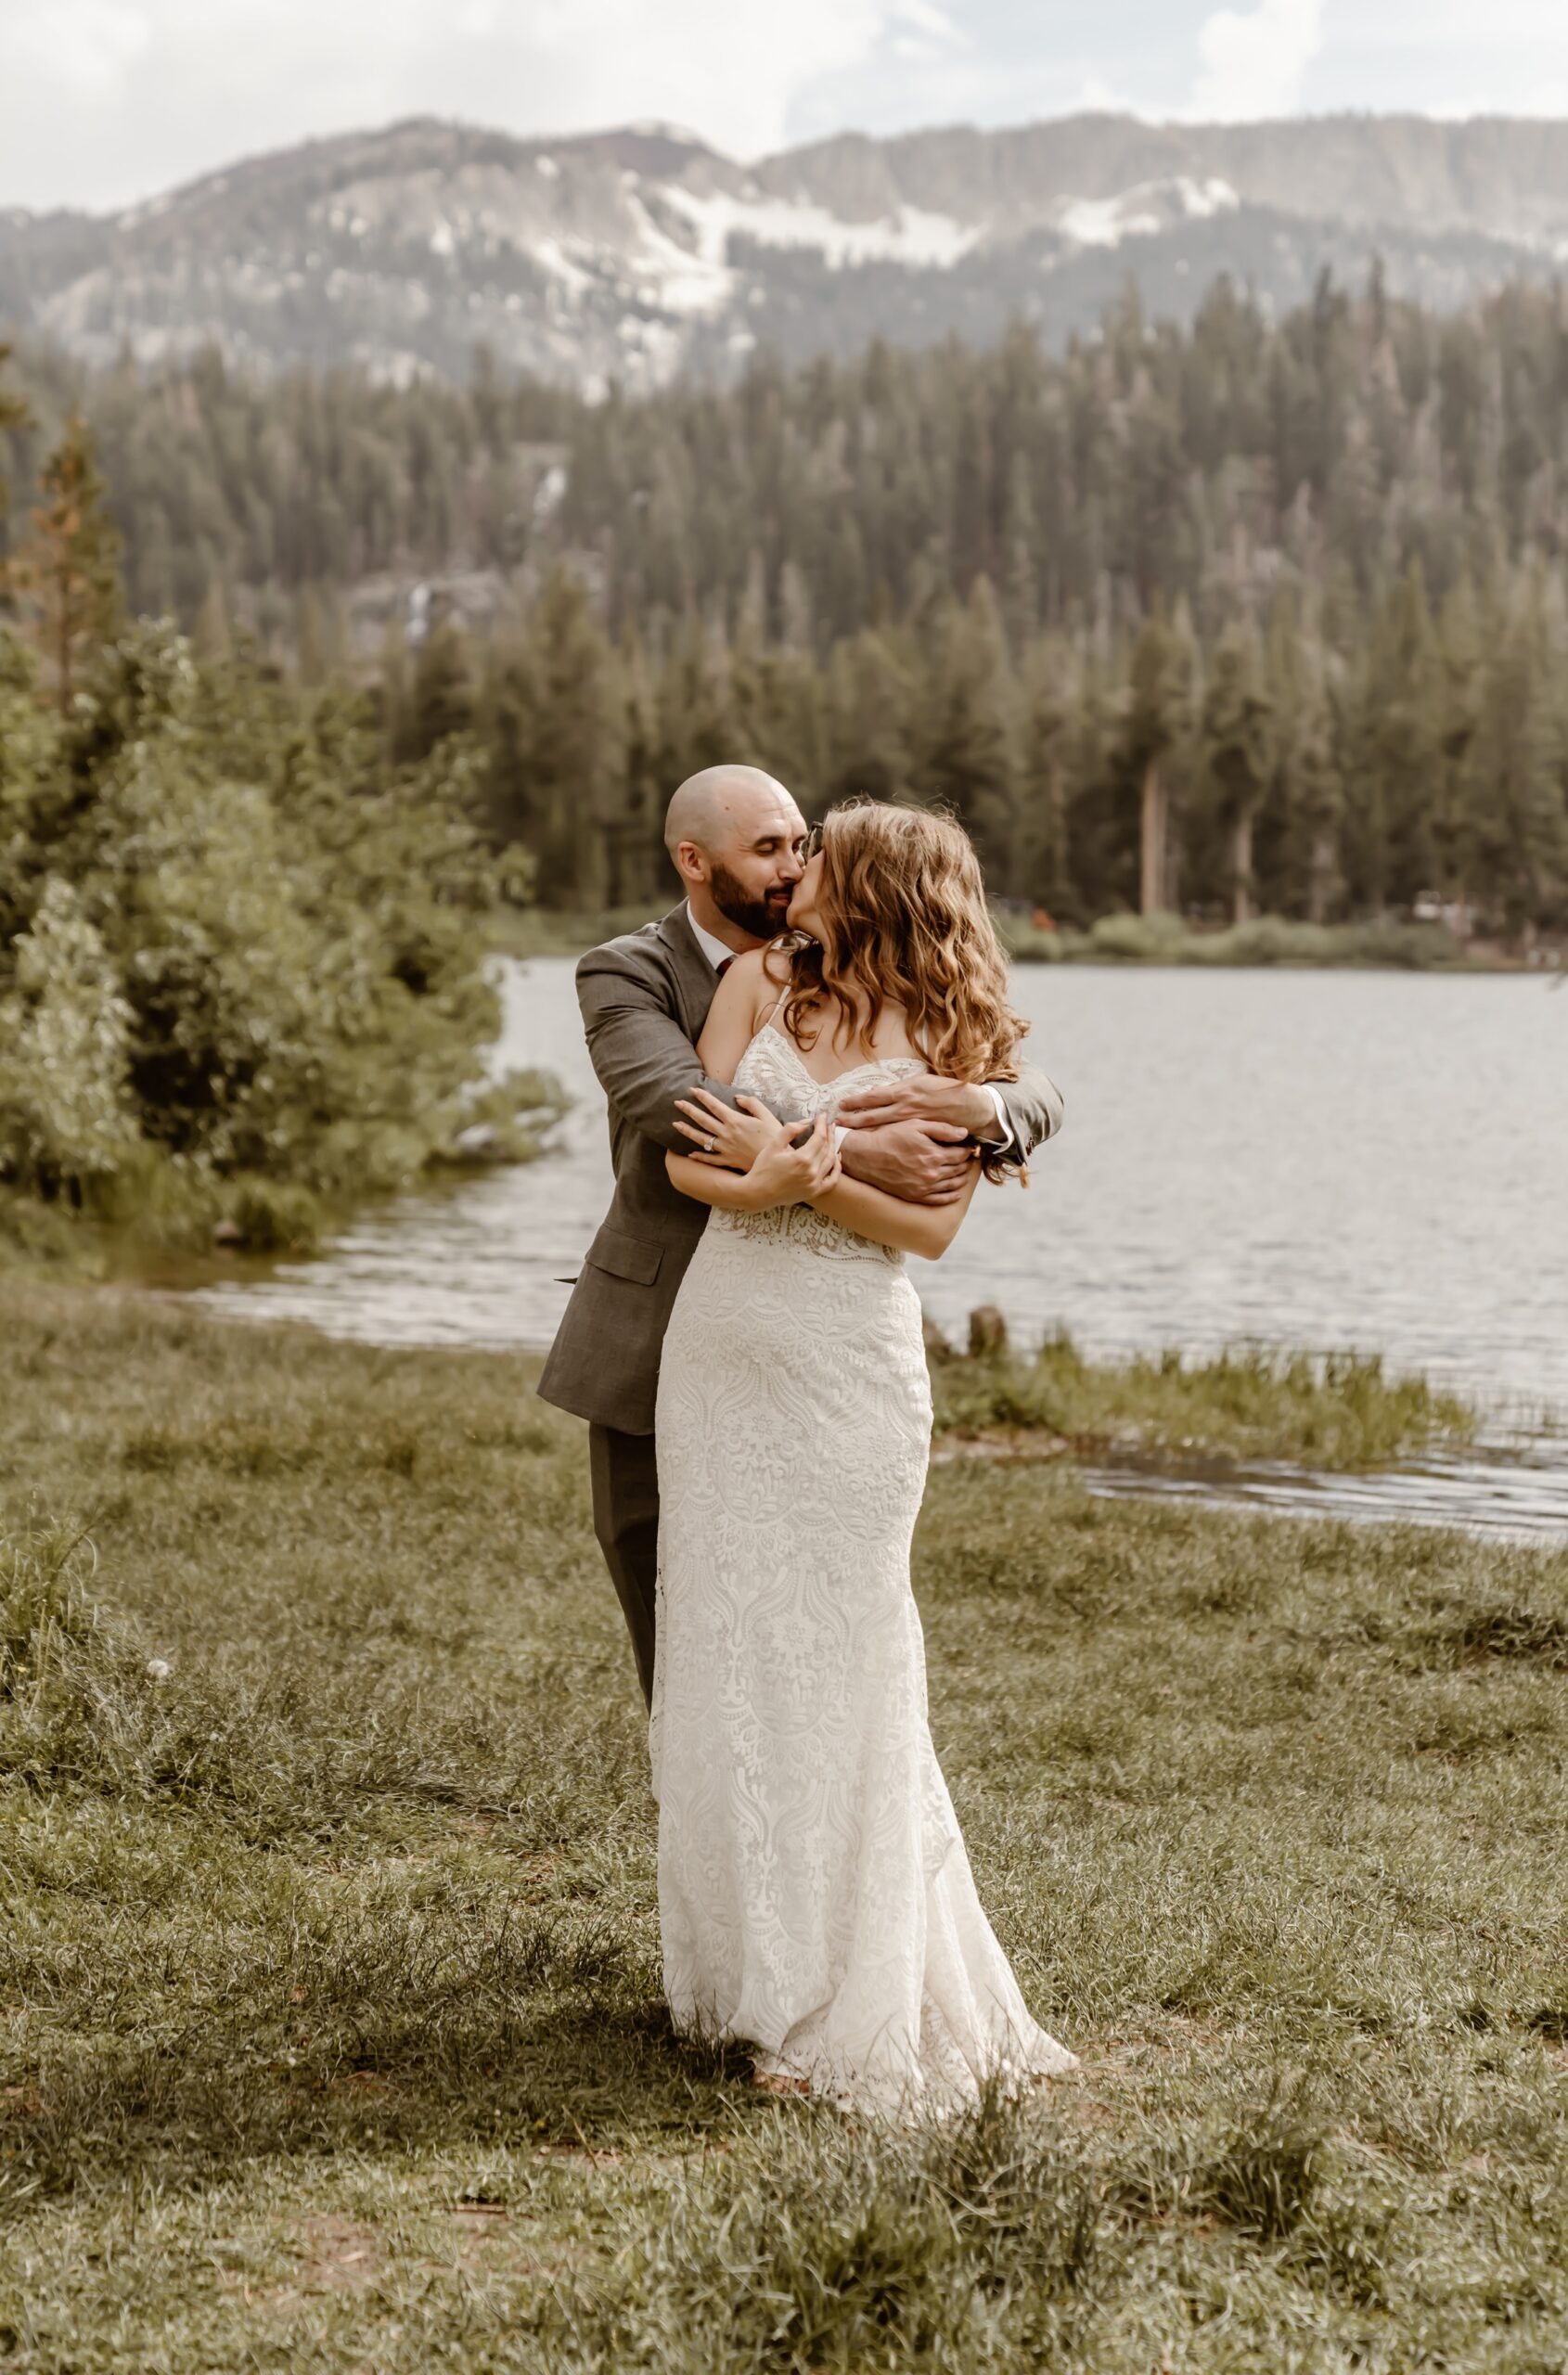 Bride and groom pictures at Mammoth Lakes wedding